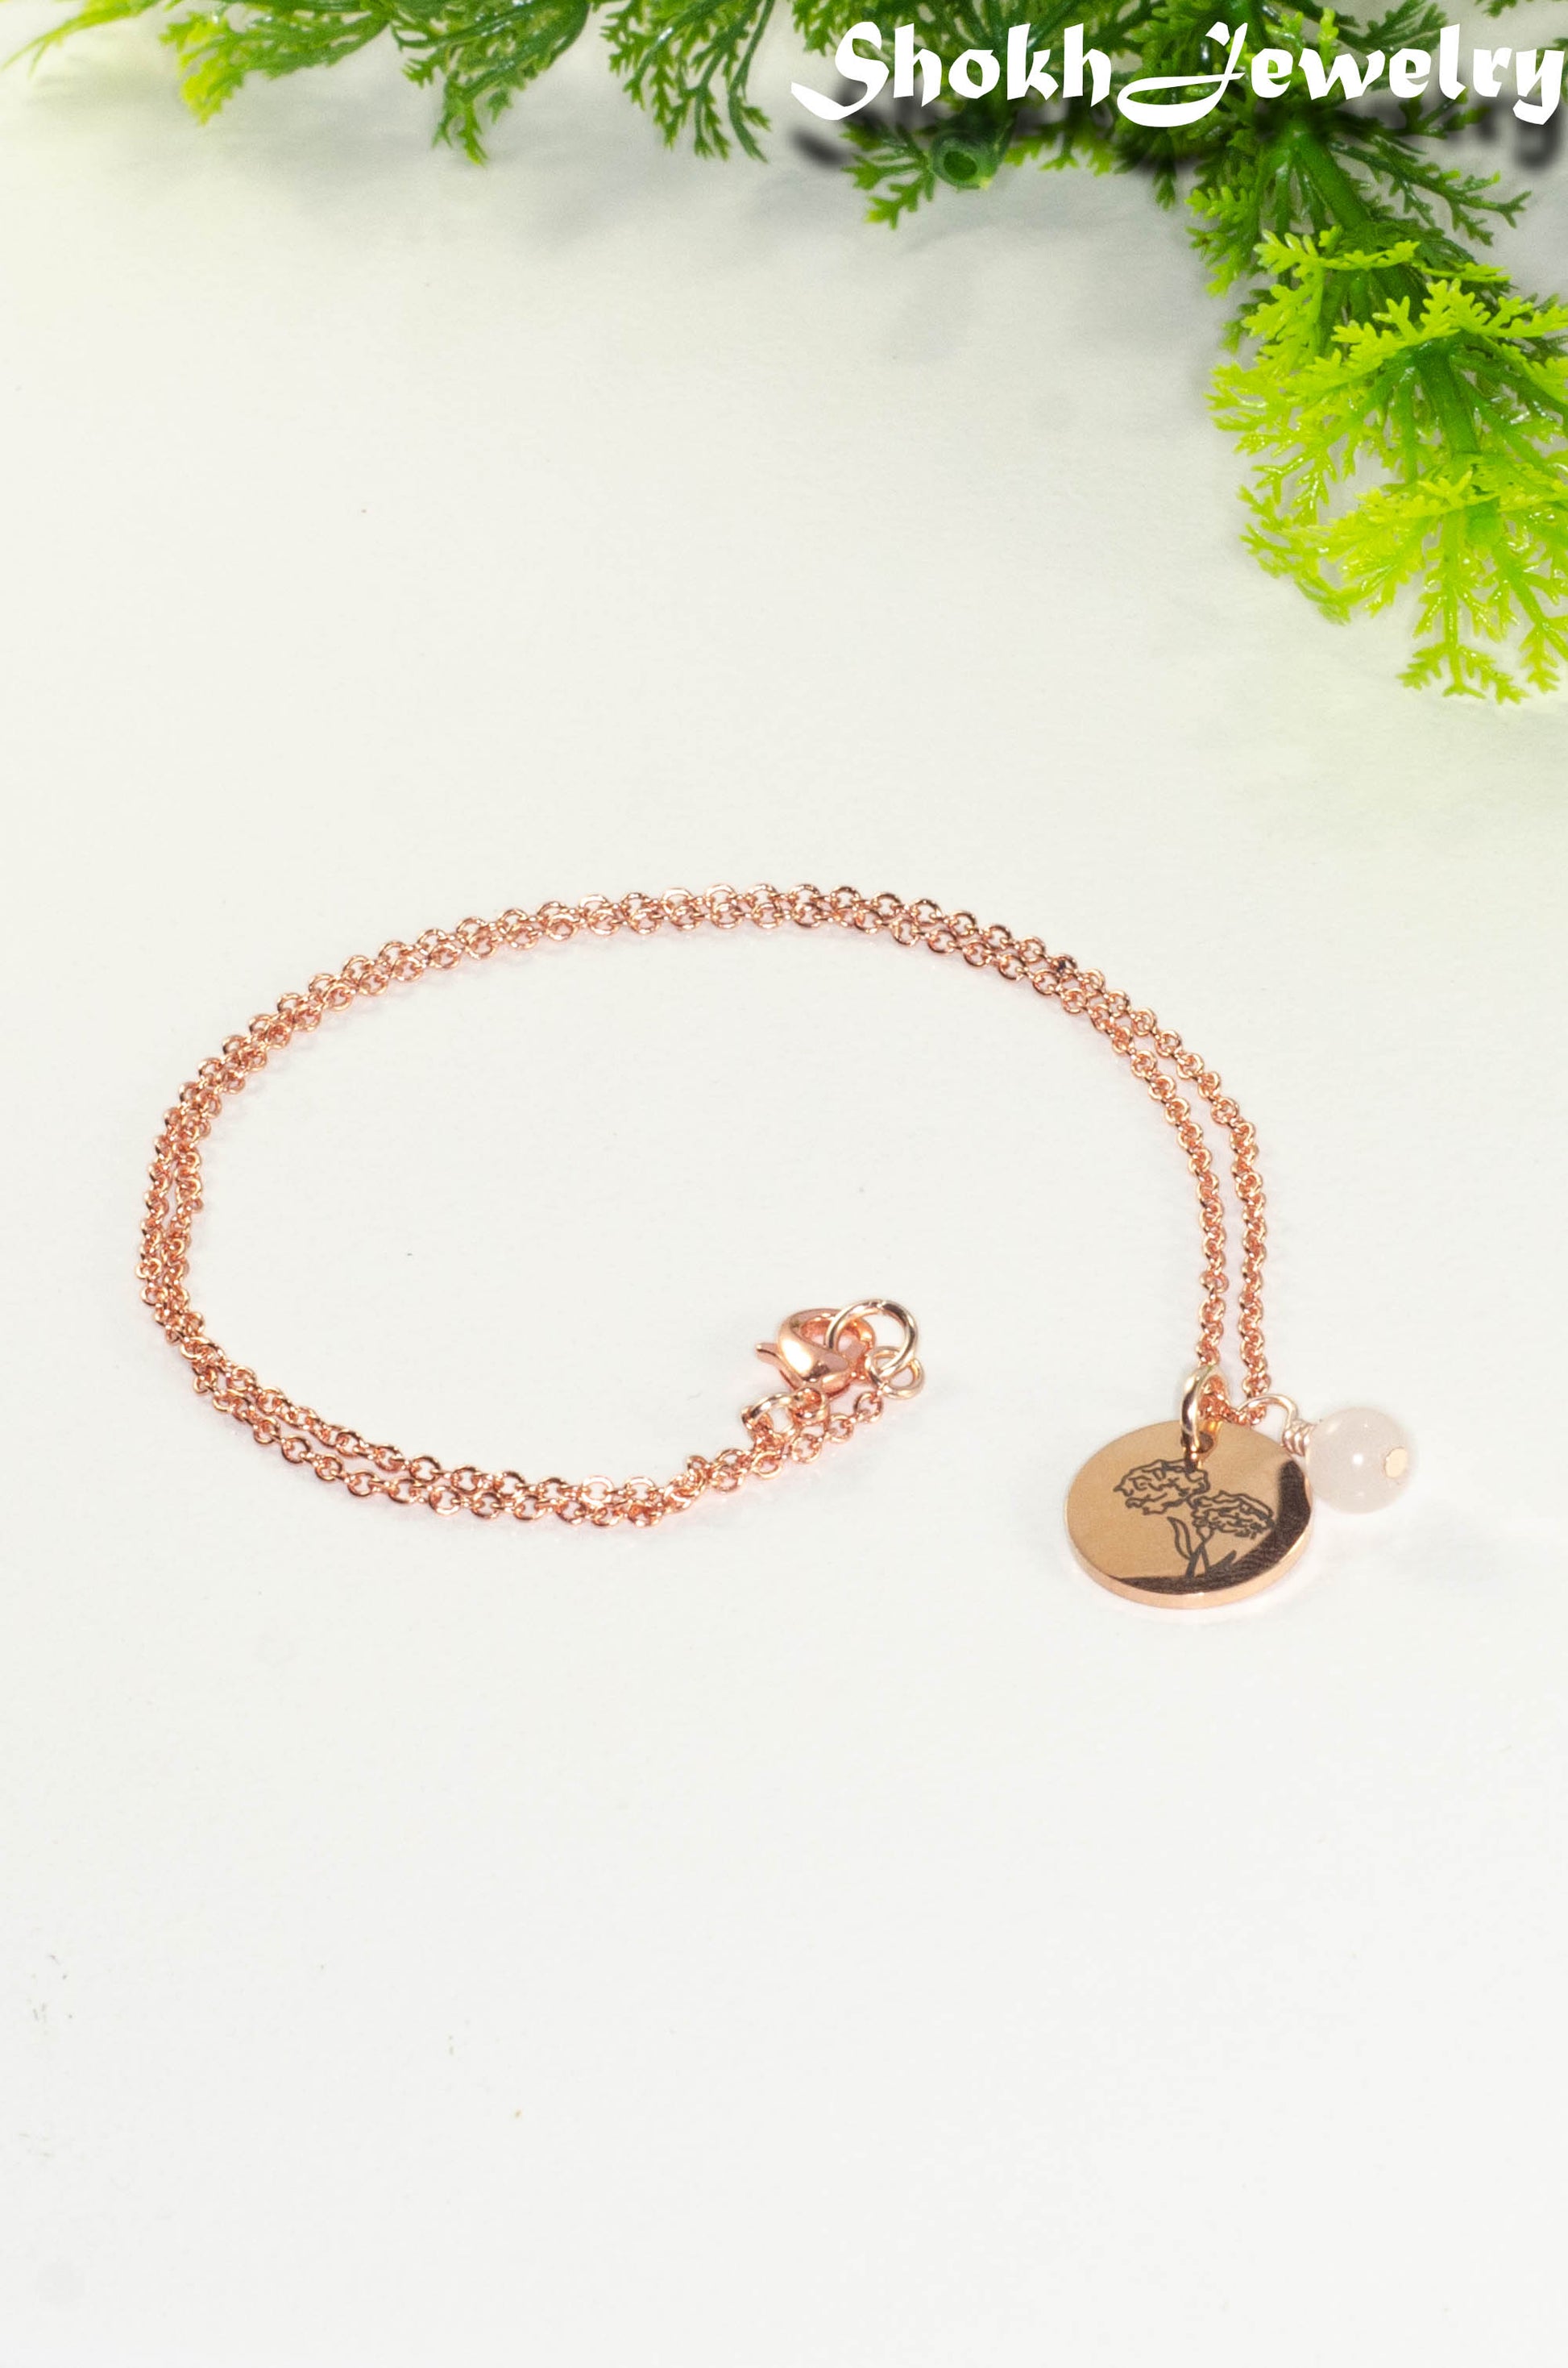 Rose Gold Plated October Birth Flower Necklace with Rose Quartz Birthstone Pendant.